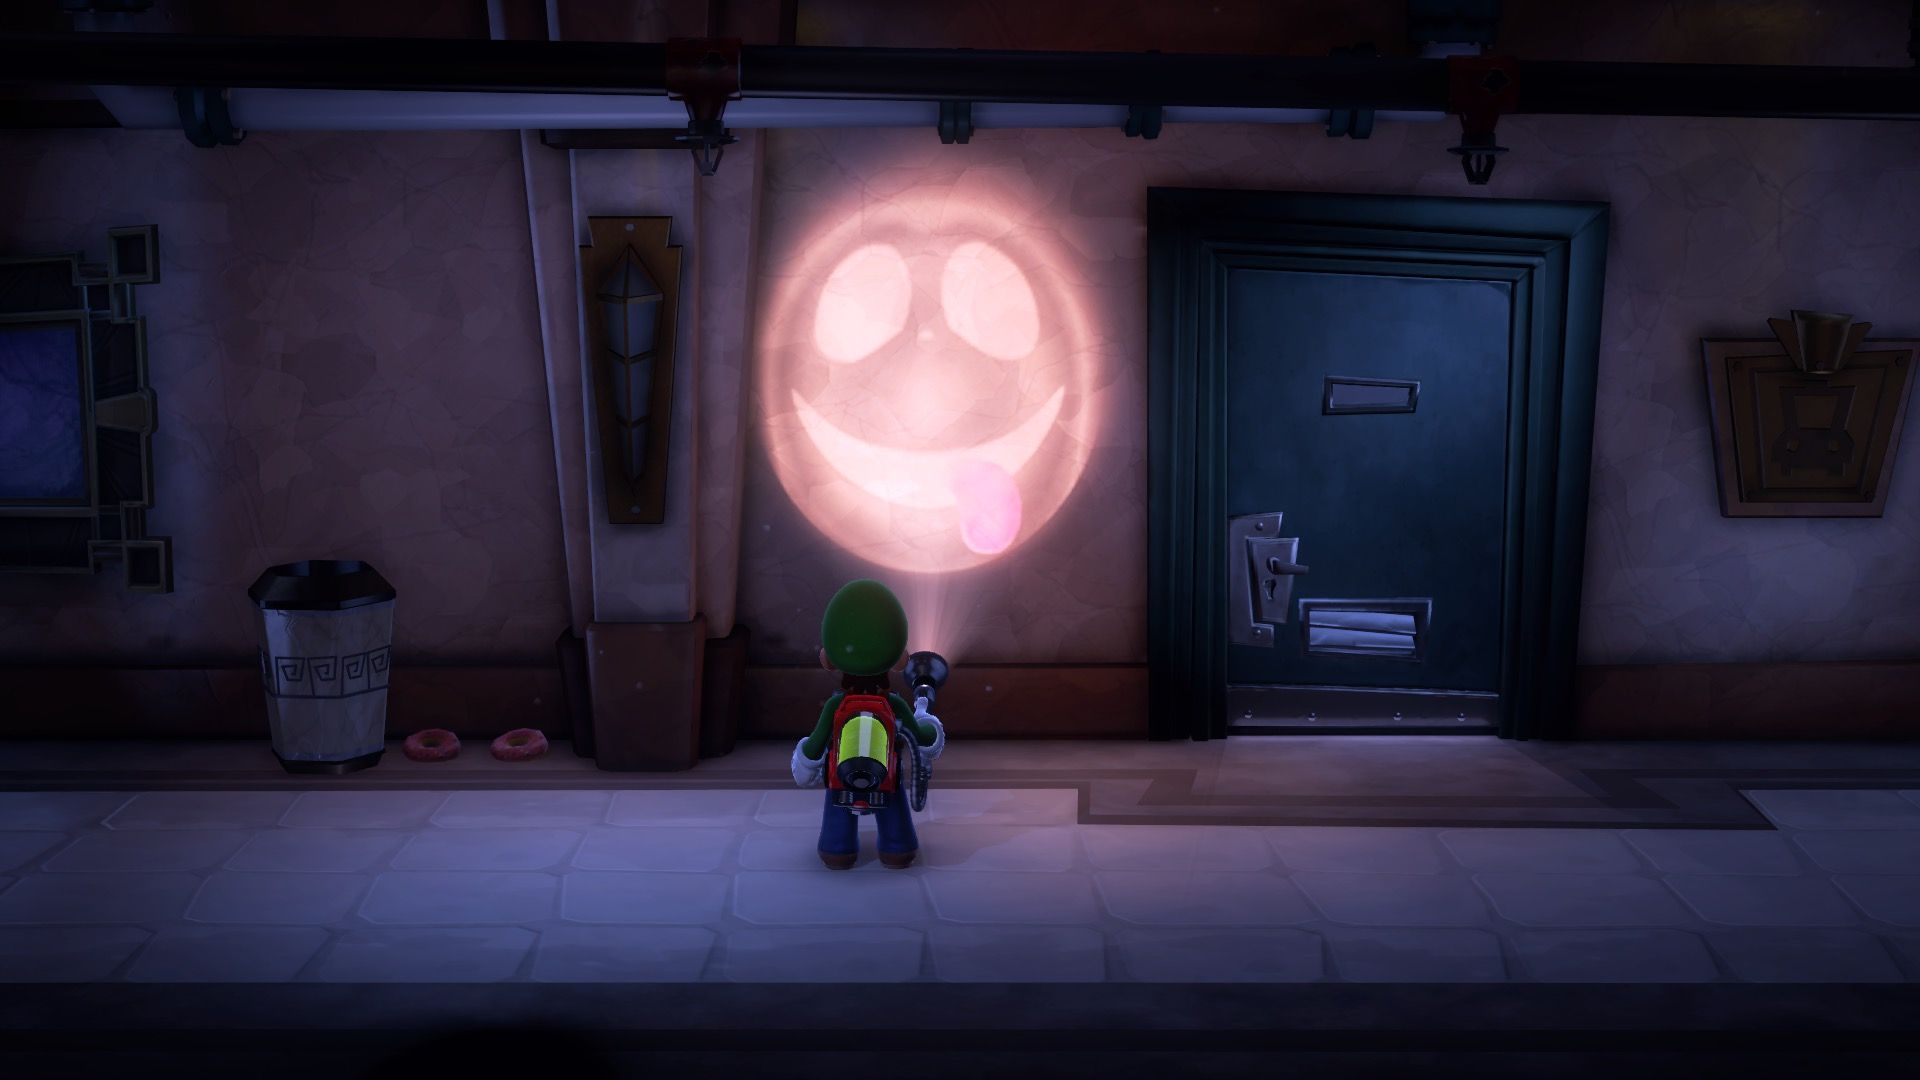 luigi's mansion 3 multiplayer pack part 1 review